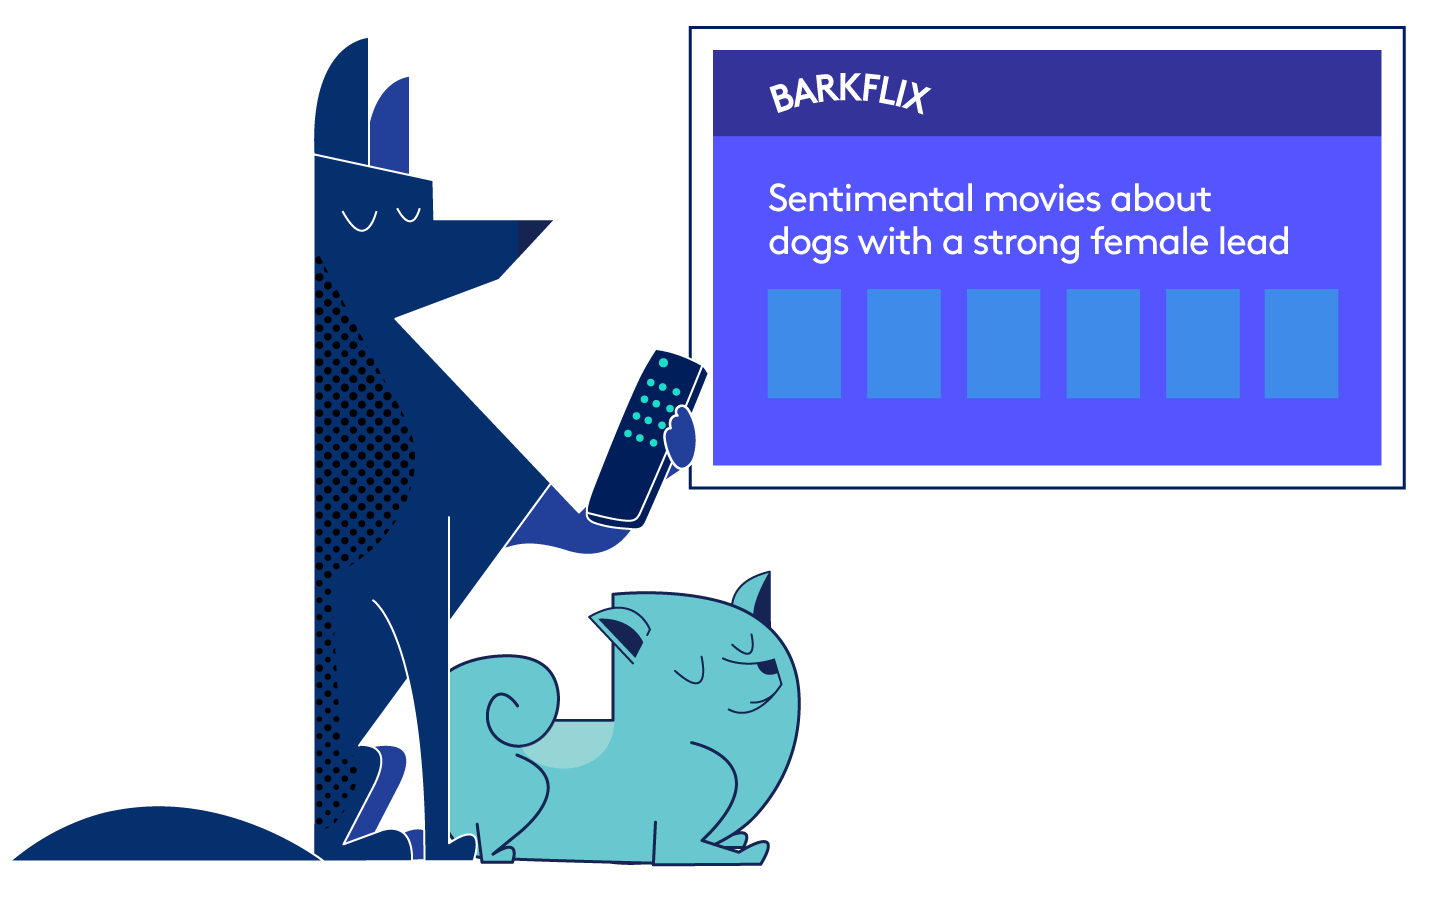 2 illustrated dogs looking at a screen, one with a TV remote. On the TV is mock up of a Netflix-like experience titled "Barkflix". They are browsing through "sentimental movies about dogs with a strong female lead."